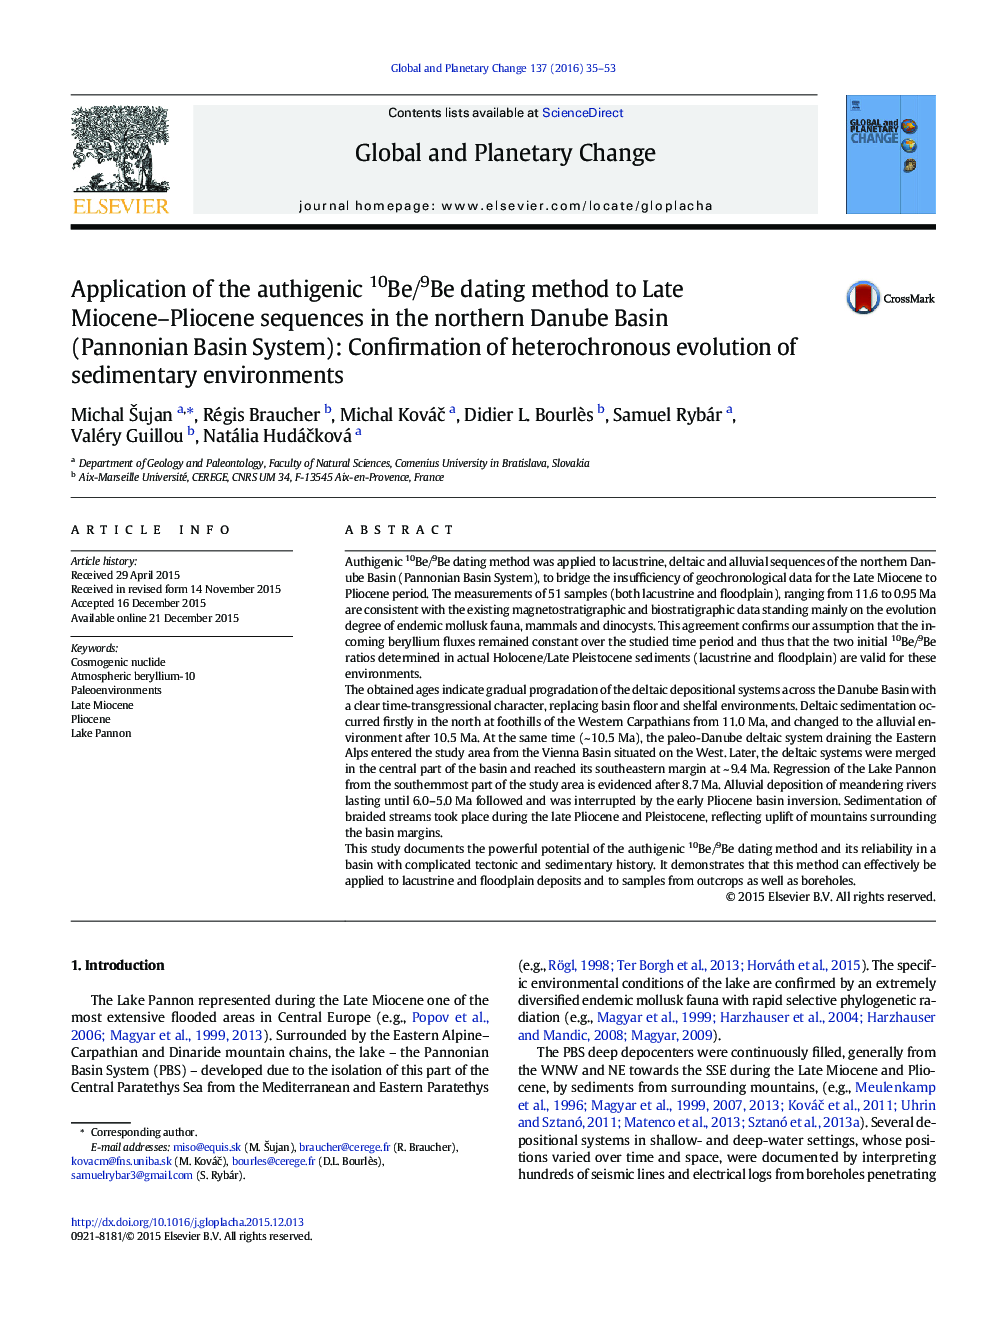 Application of the authigenic 10Be/9Be dating method to Late Miocene–Pliocene sequences in the northern Danube Basin (Pannonian Basin System): Confirmation of heterochronous evolution of sedimentary environments